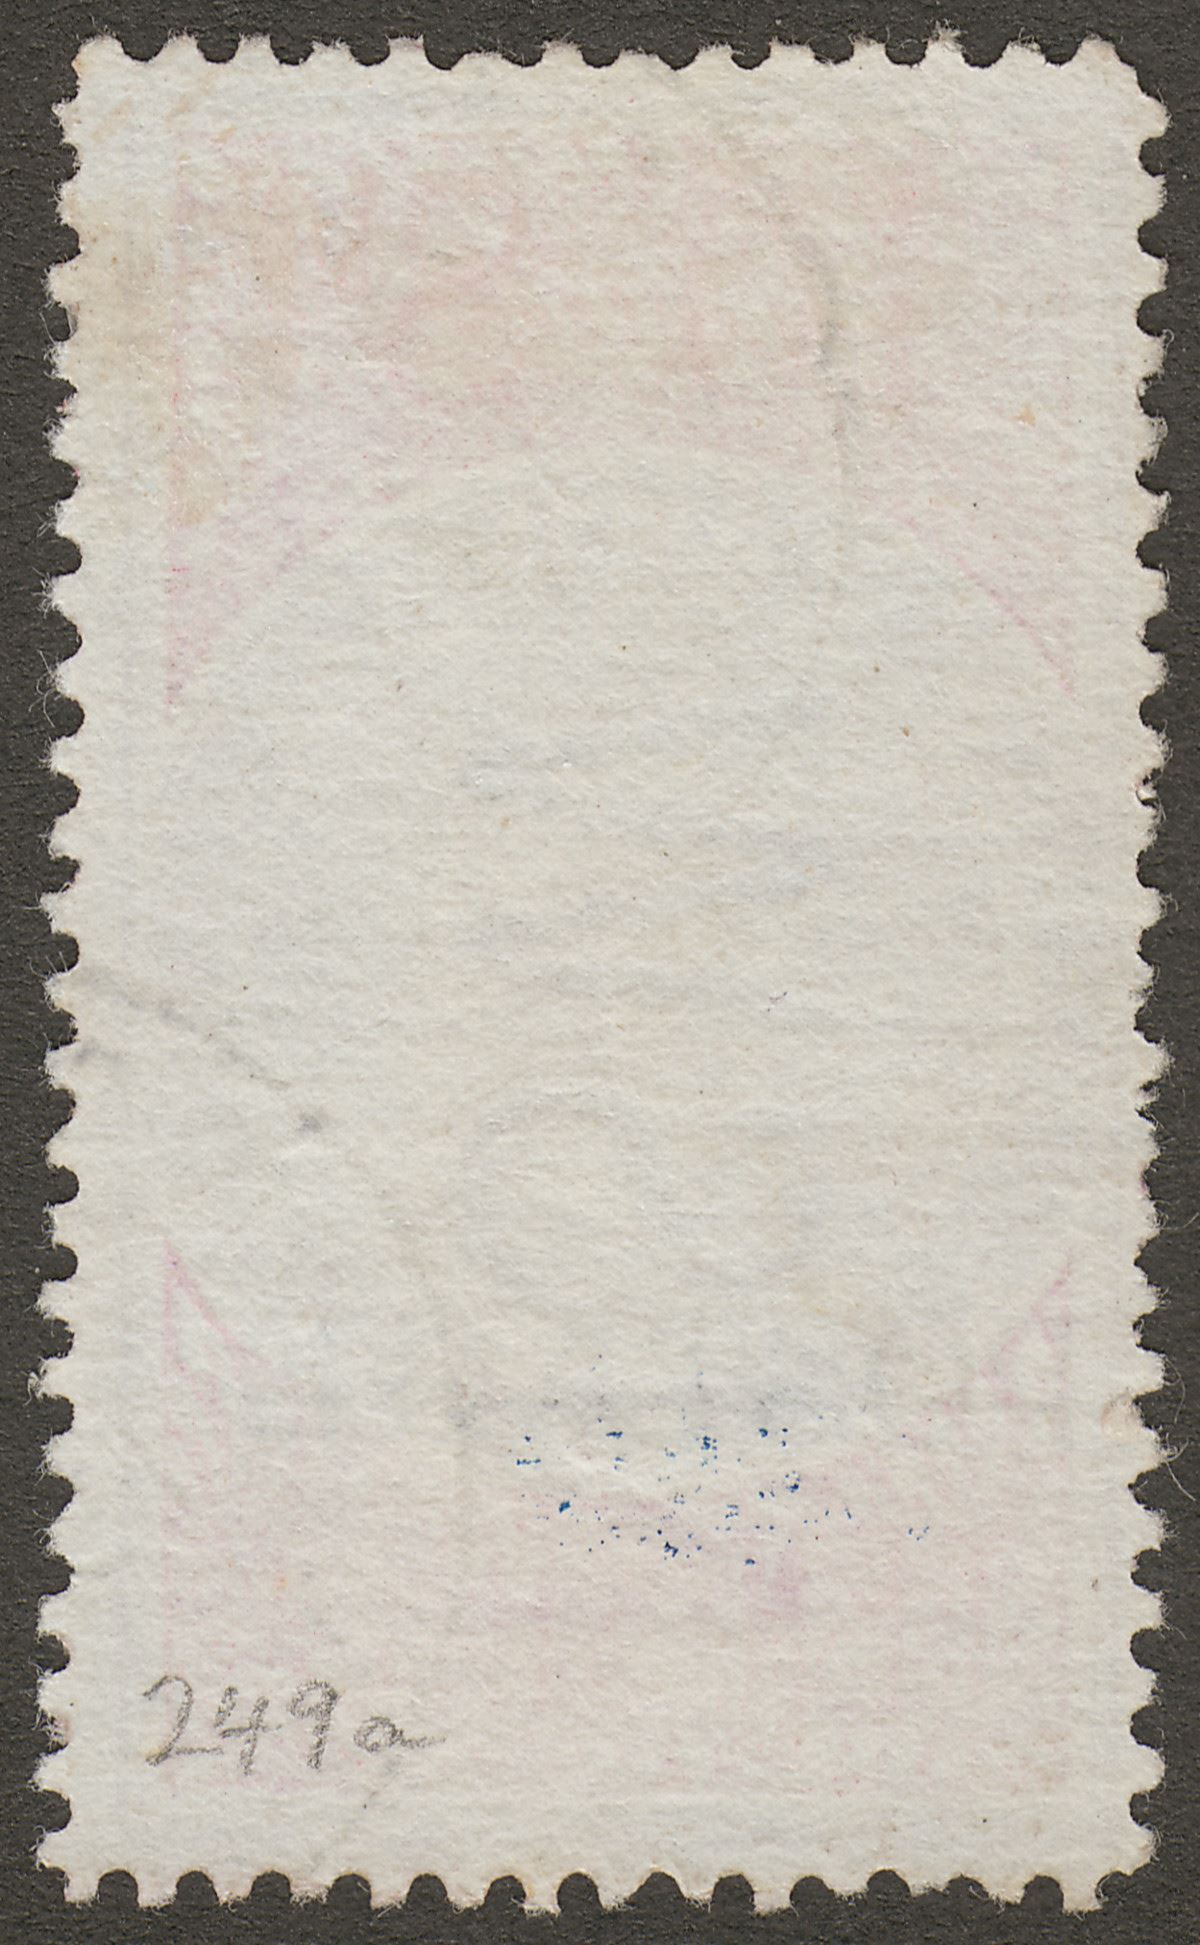 New South Wales 1894 QV Postage Opt 10sh Violet + Claret p12 Used SG275 cat £50